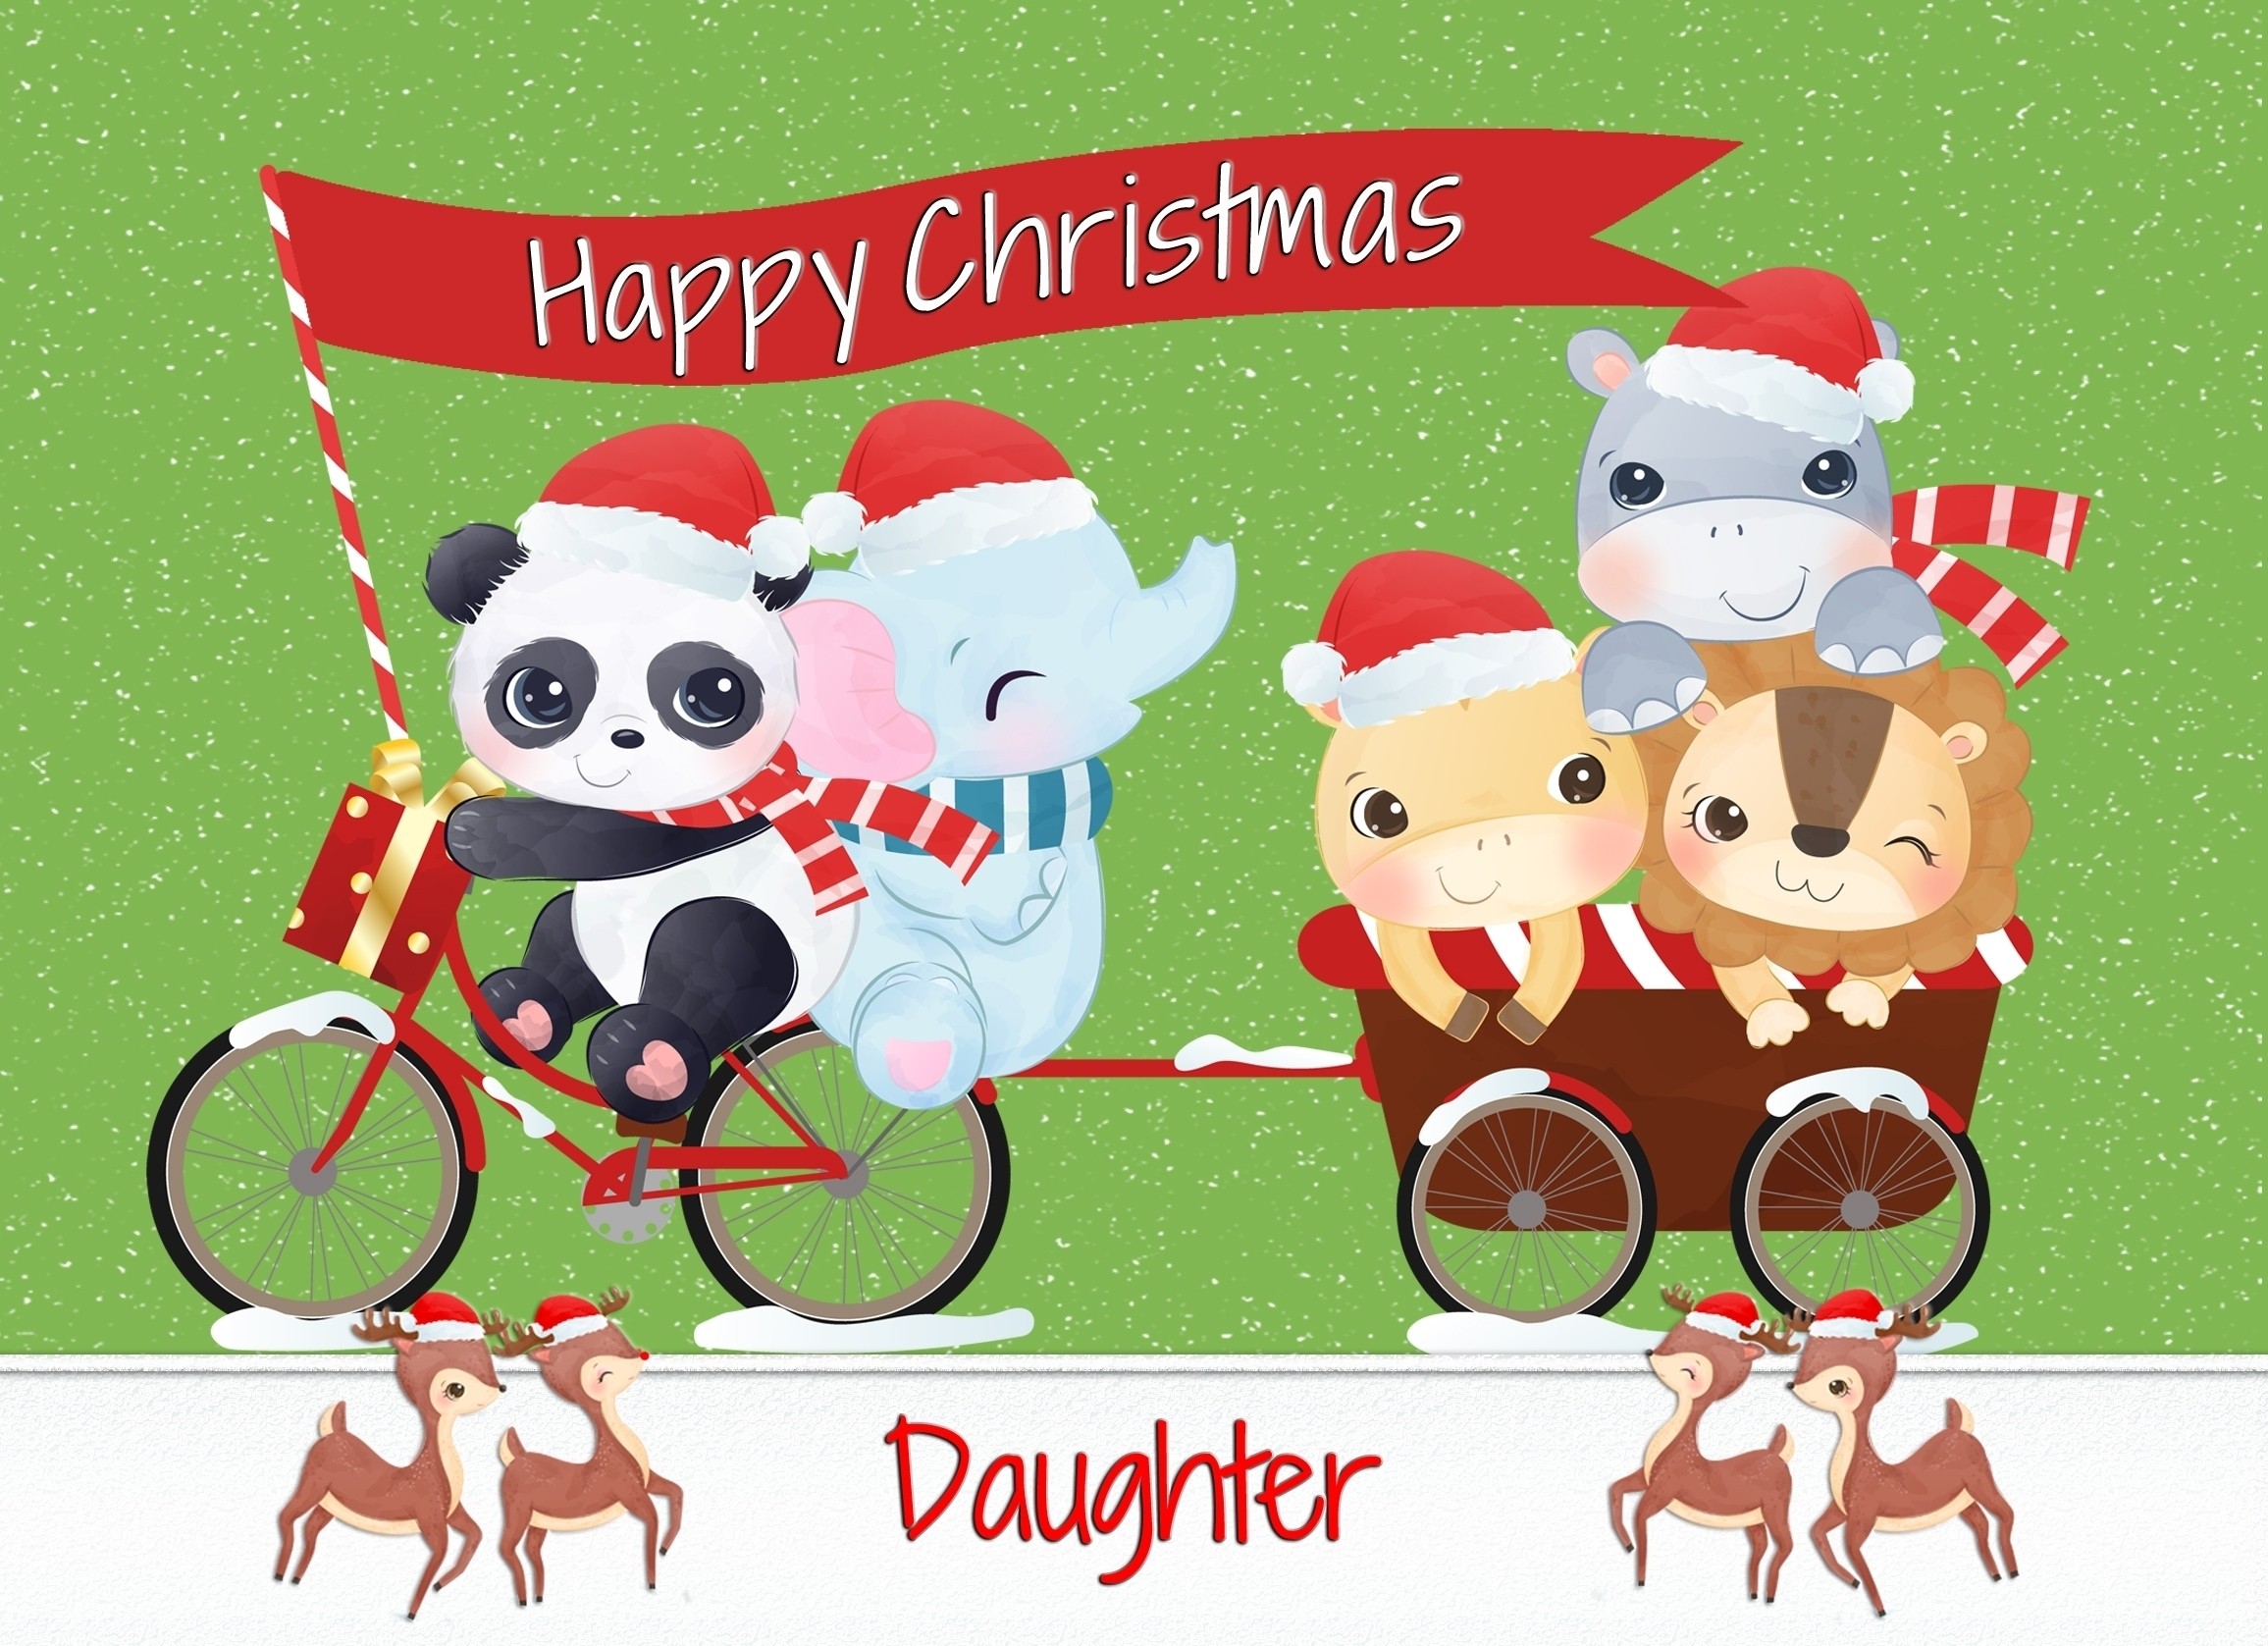 Christmas Card For Daughter (Green Animals)